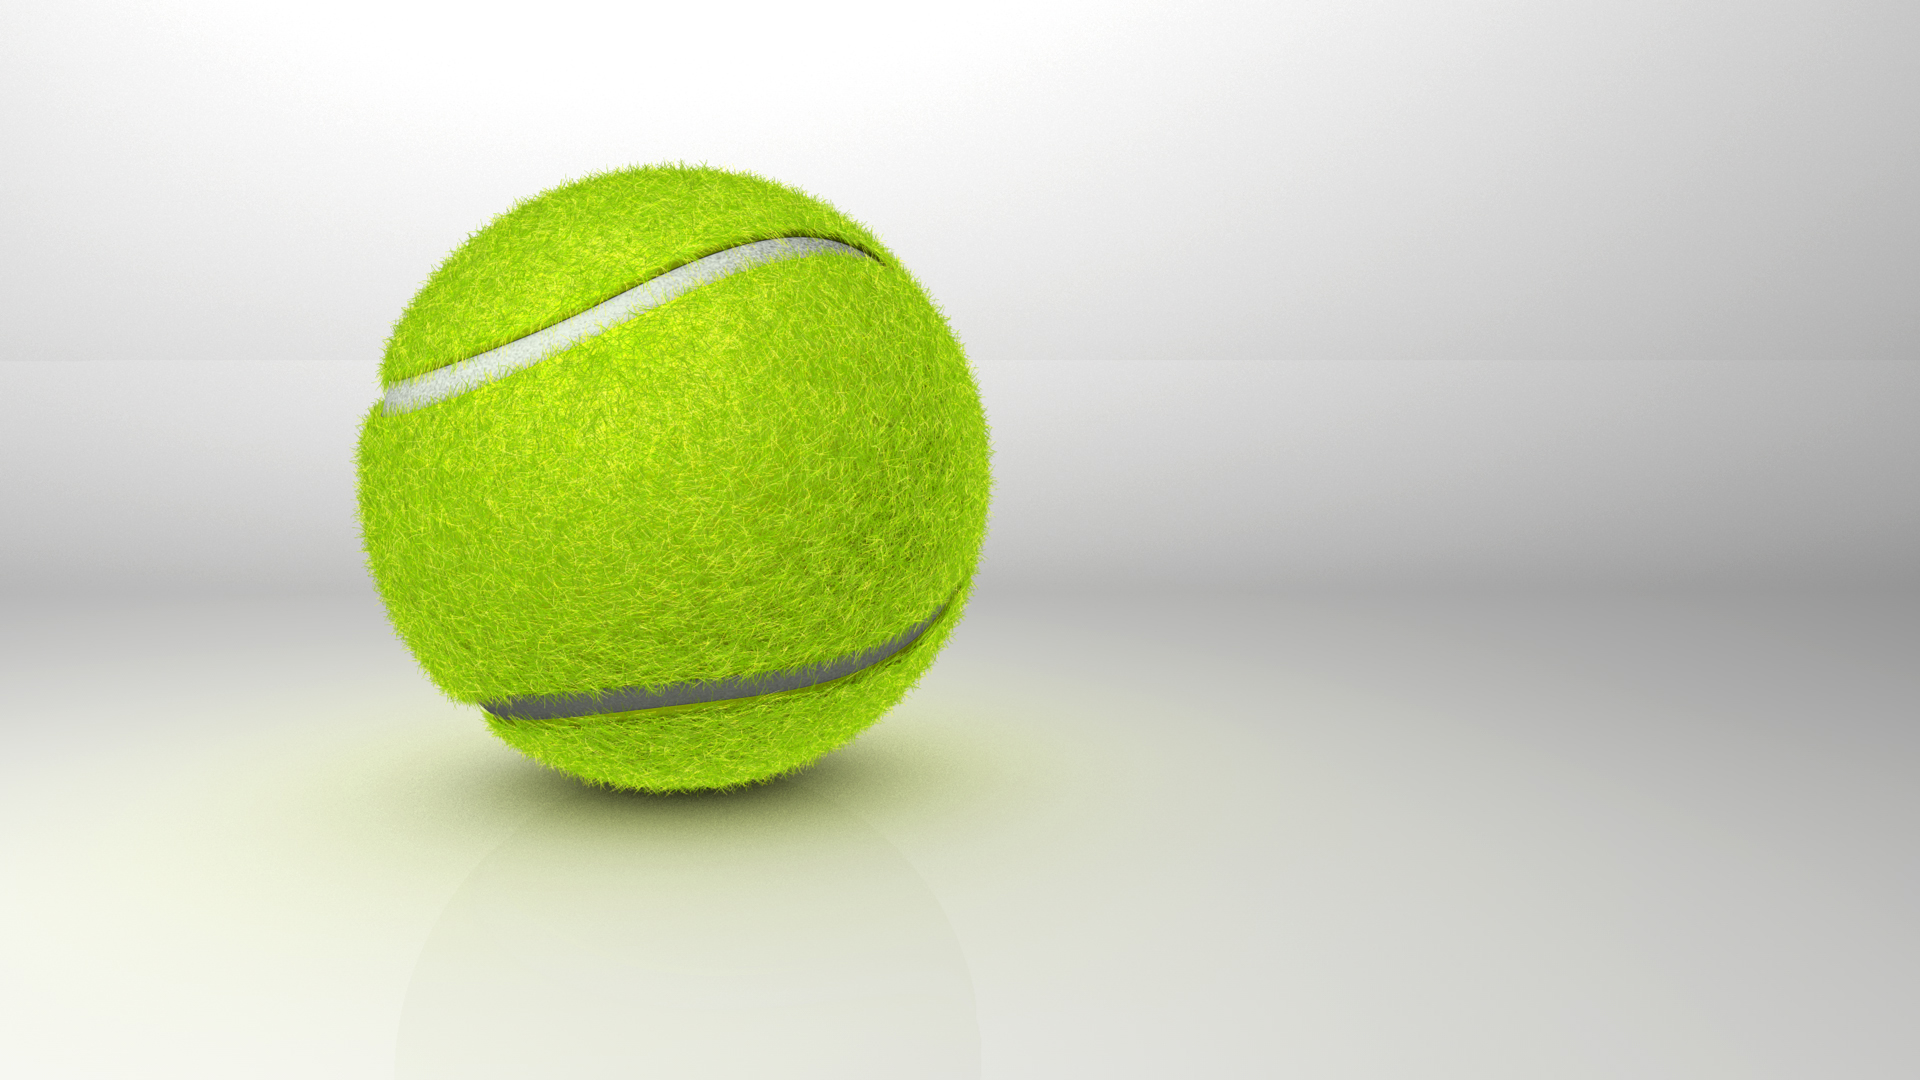 Tennis ball in front of black background HD wallpaper download